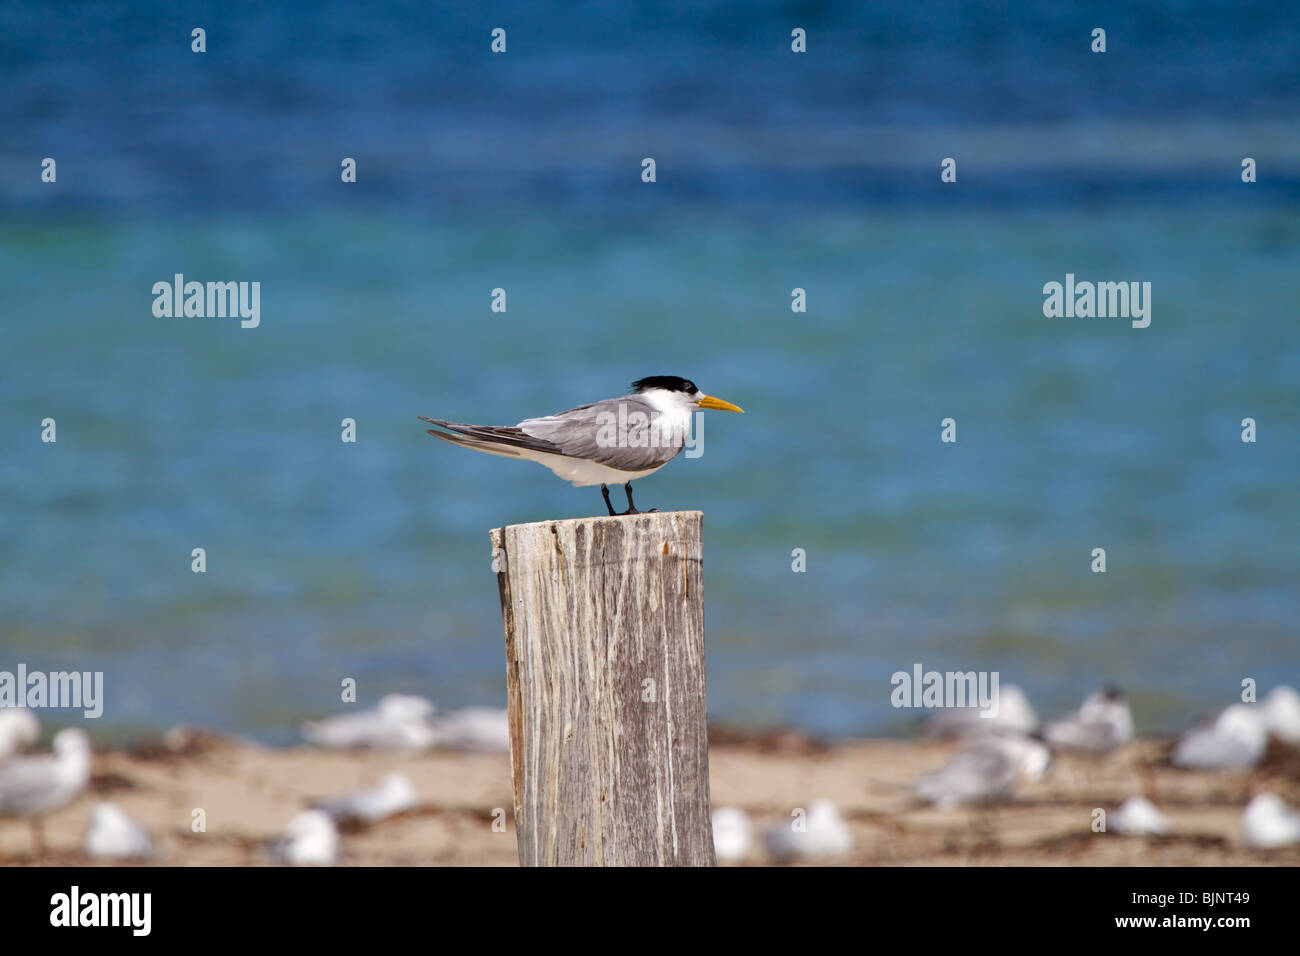 Greater Crested Tern, Crested Tern or Swift Tern, Thalasseus bergii cristata Stock Photo